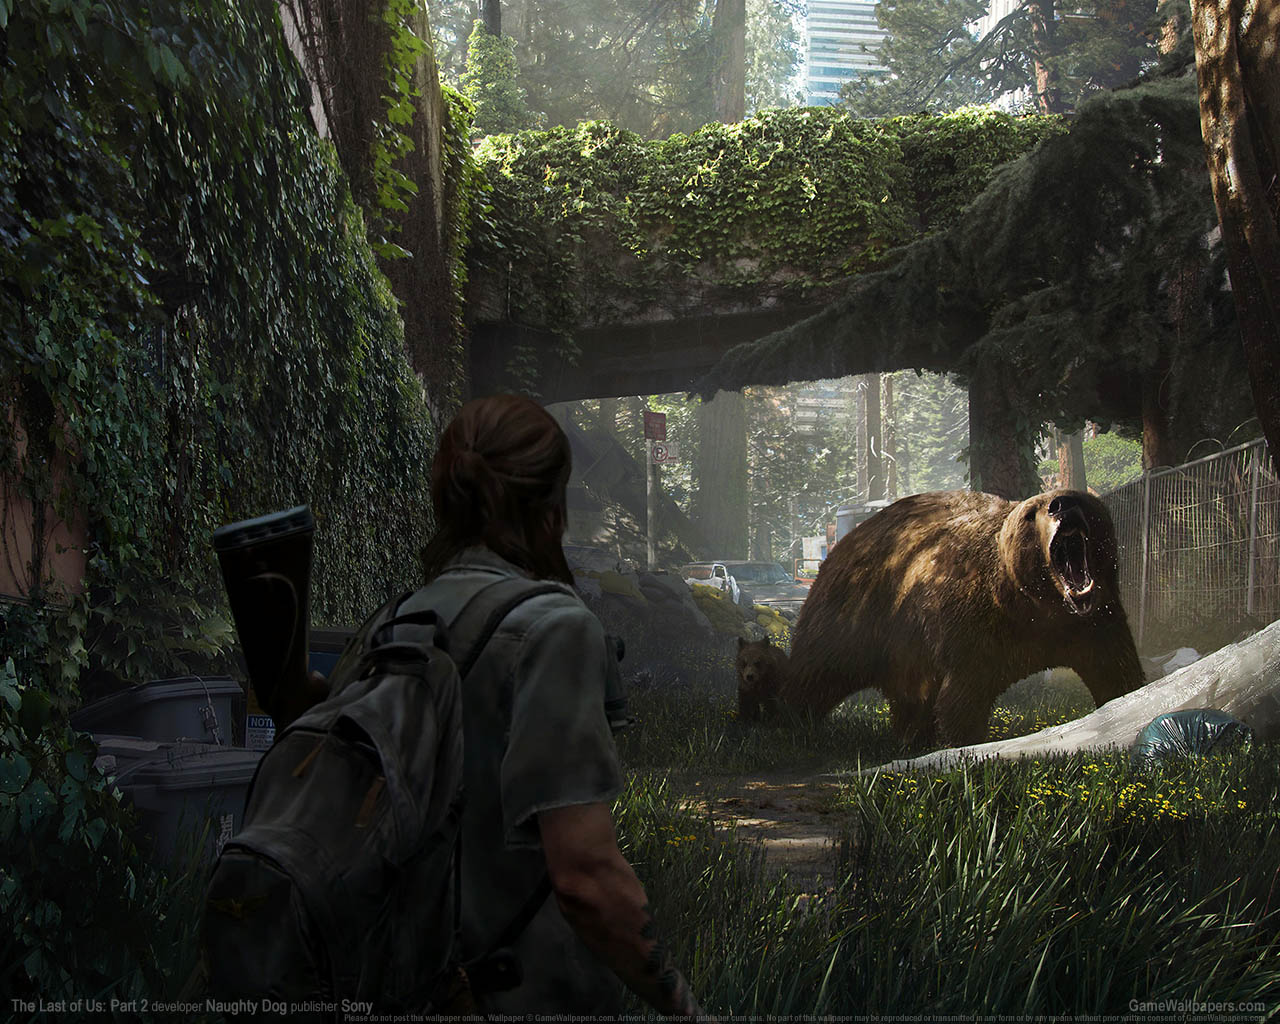 The Last of Us%253A Part 2 achtergrond 11 1280x1024